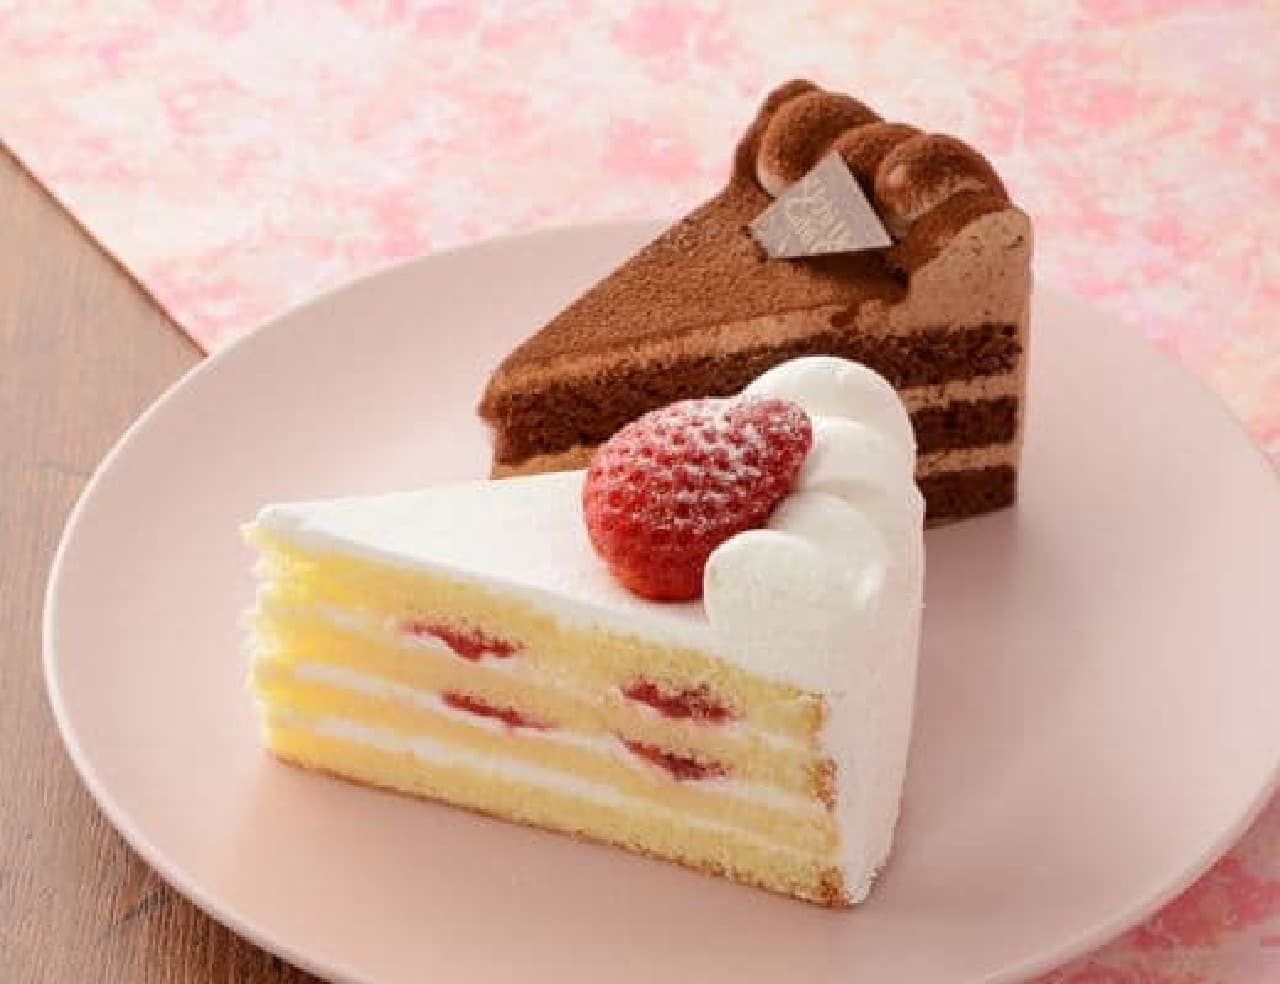 Lawson "Party Cake - Strawberry & Chocolate